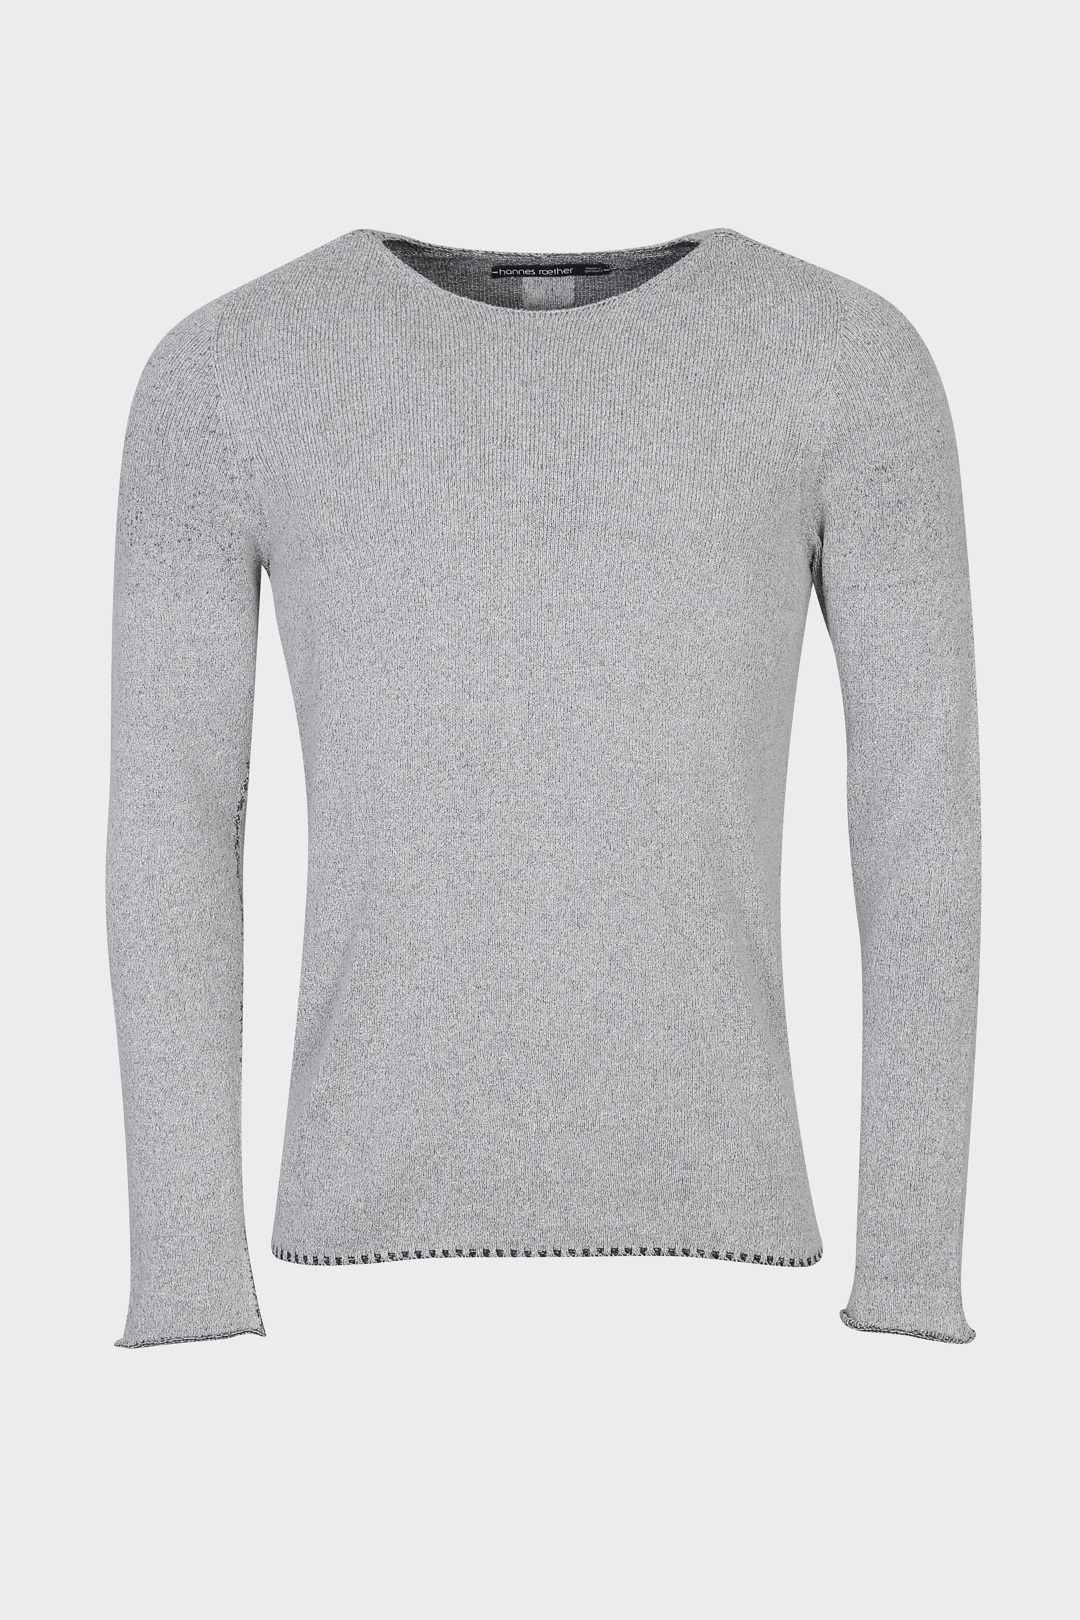 HANNES ROETHER Knit Sweater in Light Grey